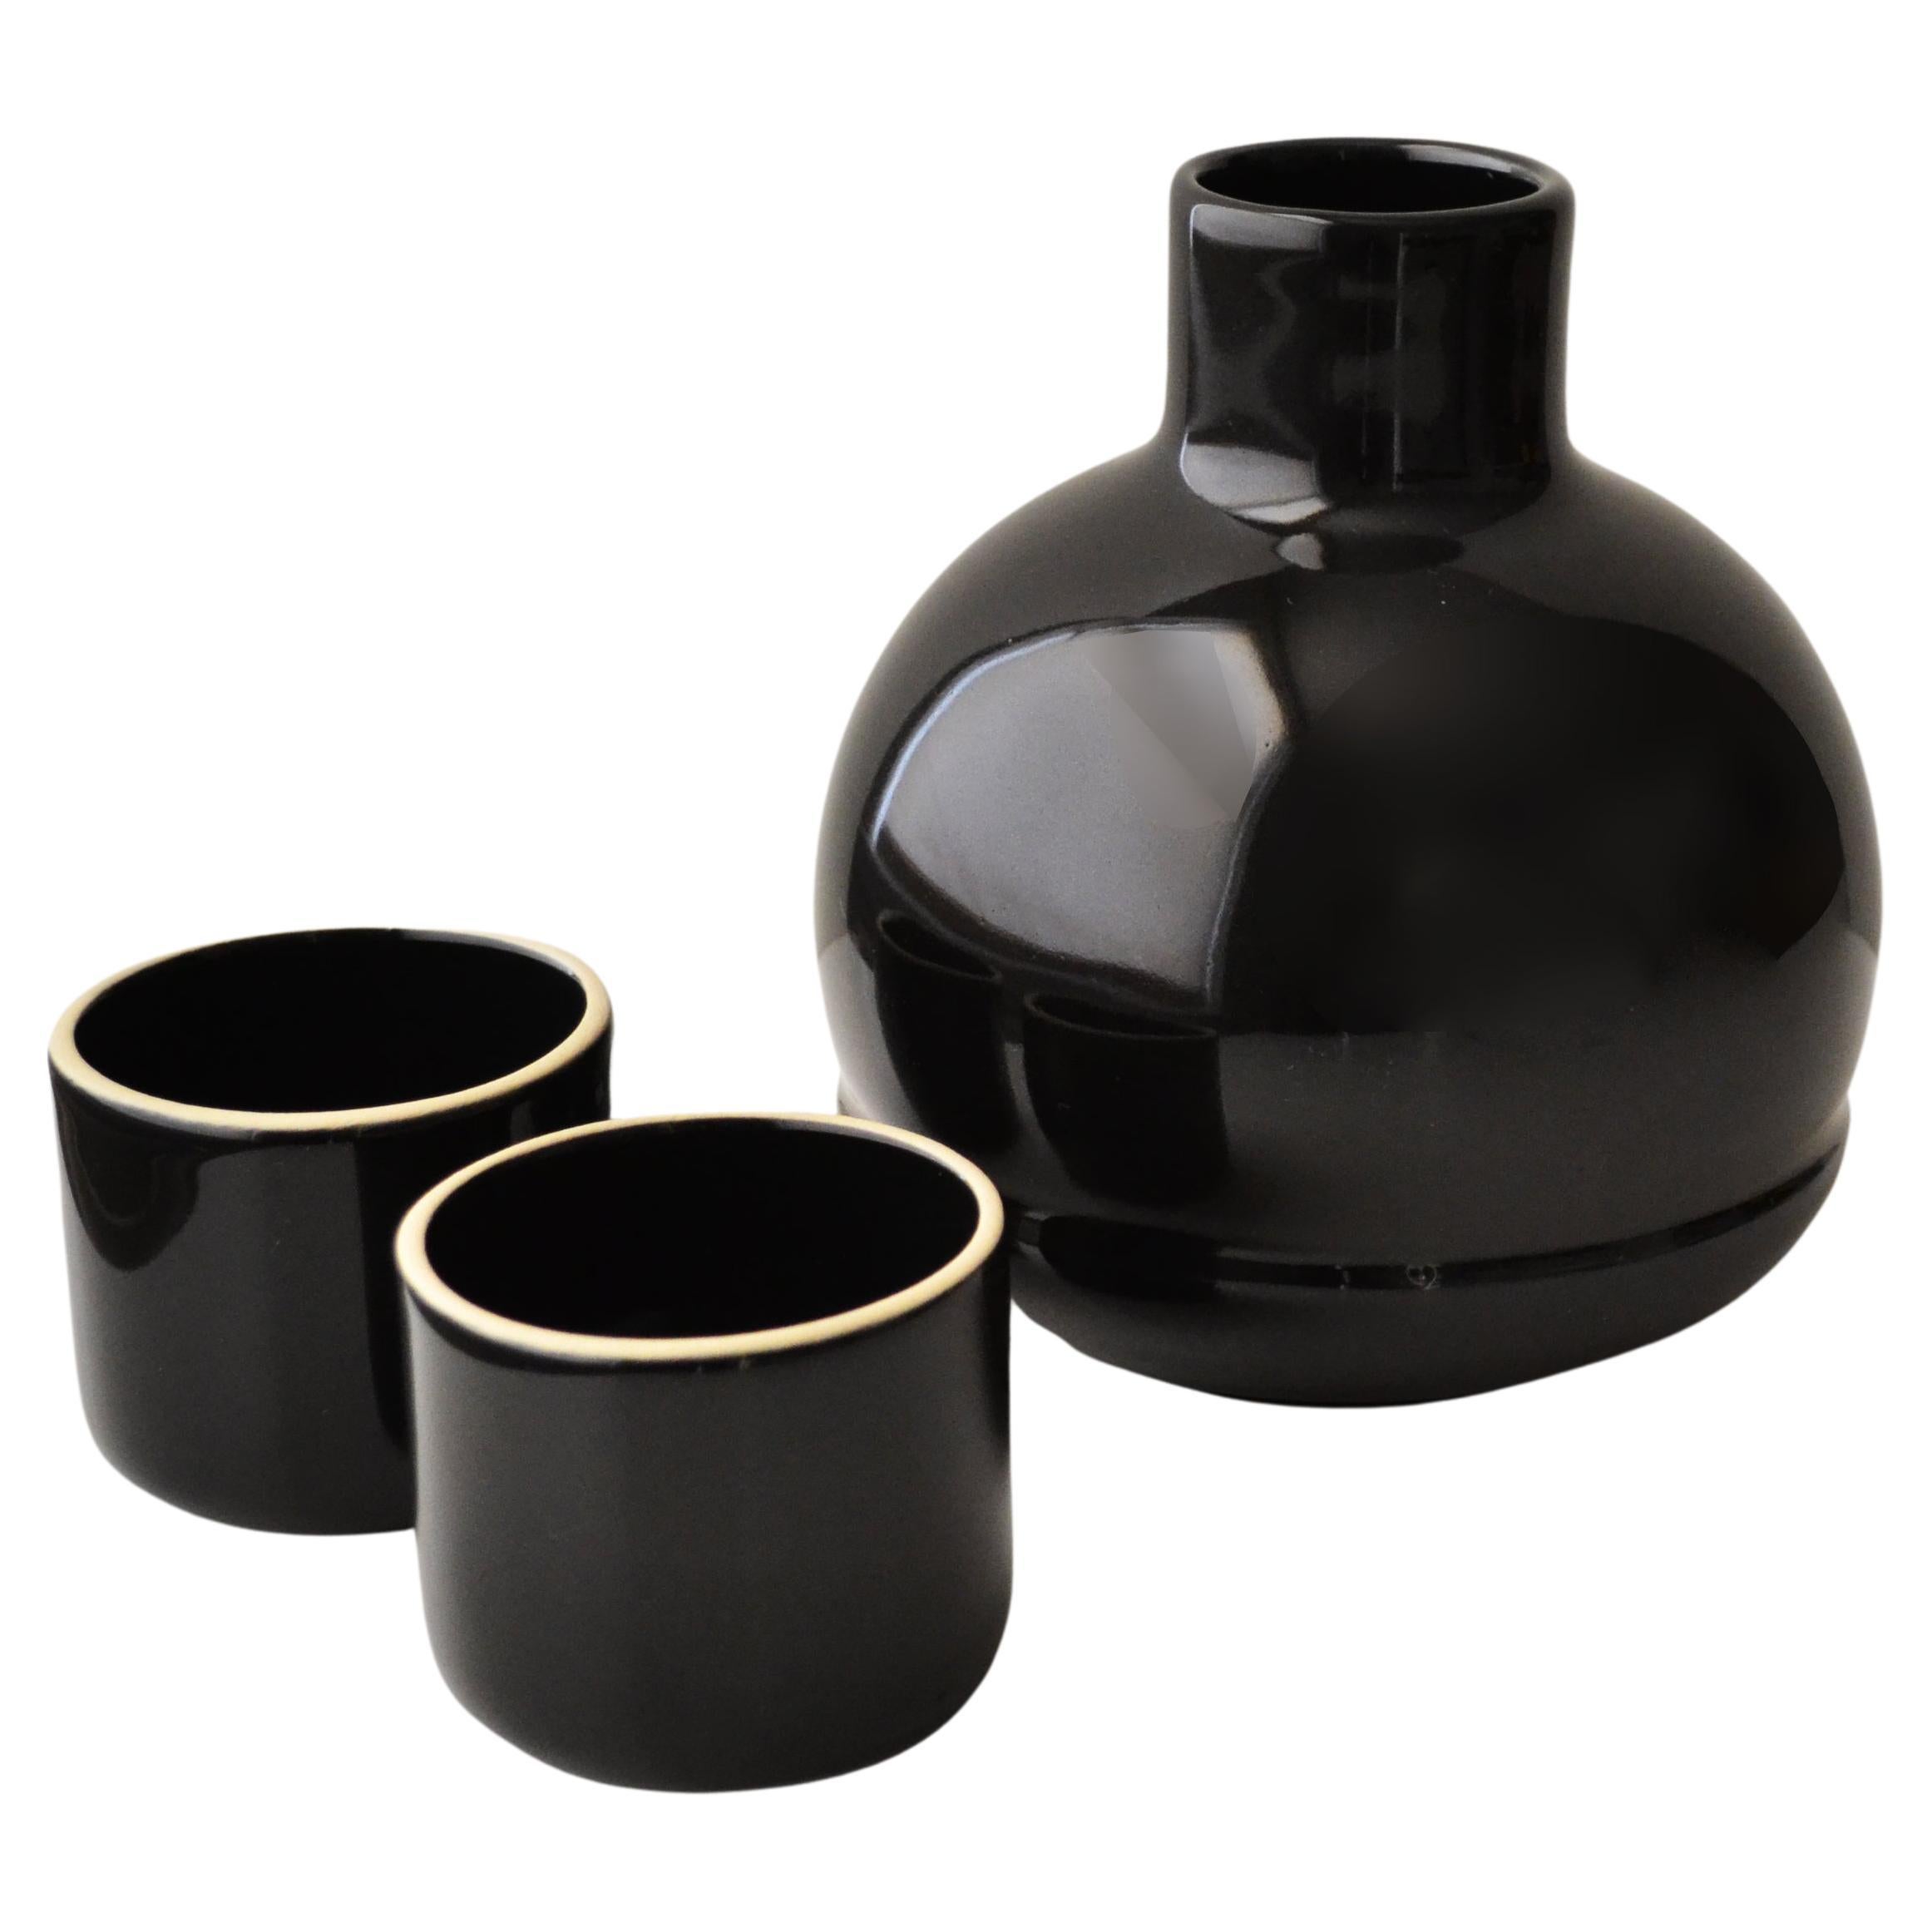 Special Edition Ceramic Carafe and Cups Bright Shine Black Jug Flower Vase Small For Sale